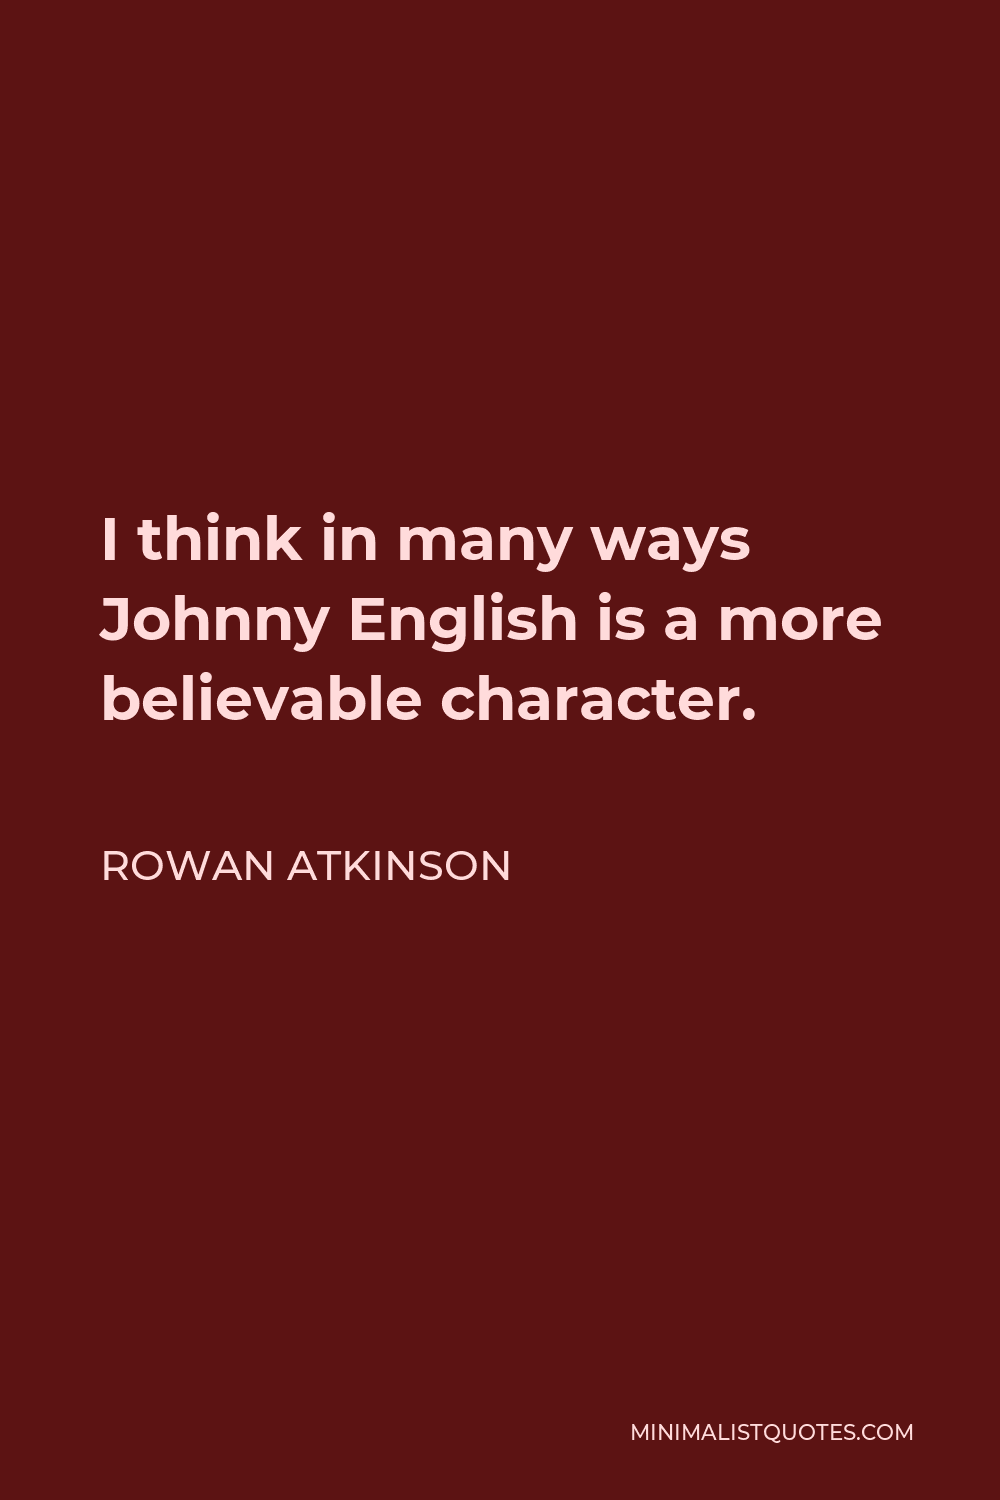 Rowan Atkinson Quote - I think in many ways Johnny English is a more believable character.